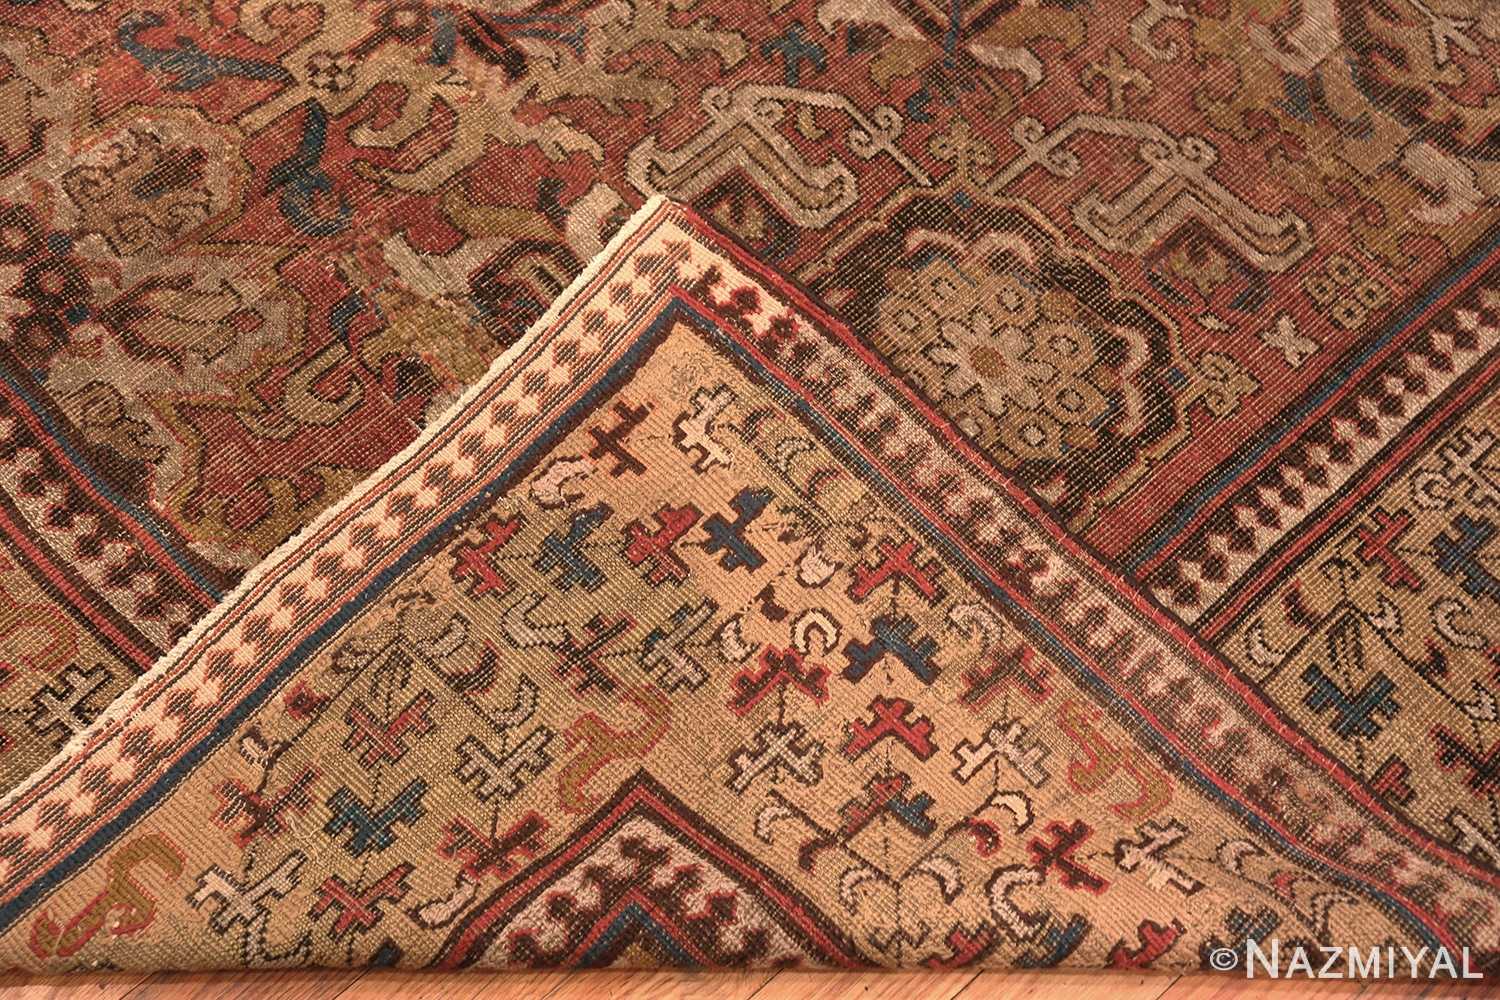 Weave Of 17th Century Antique Caucasian Kuba Blossom Rug 48855 by Nazmiyal NYC